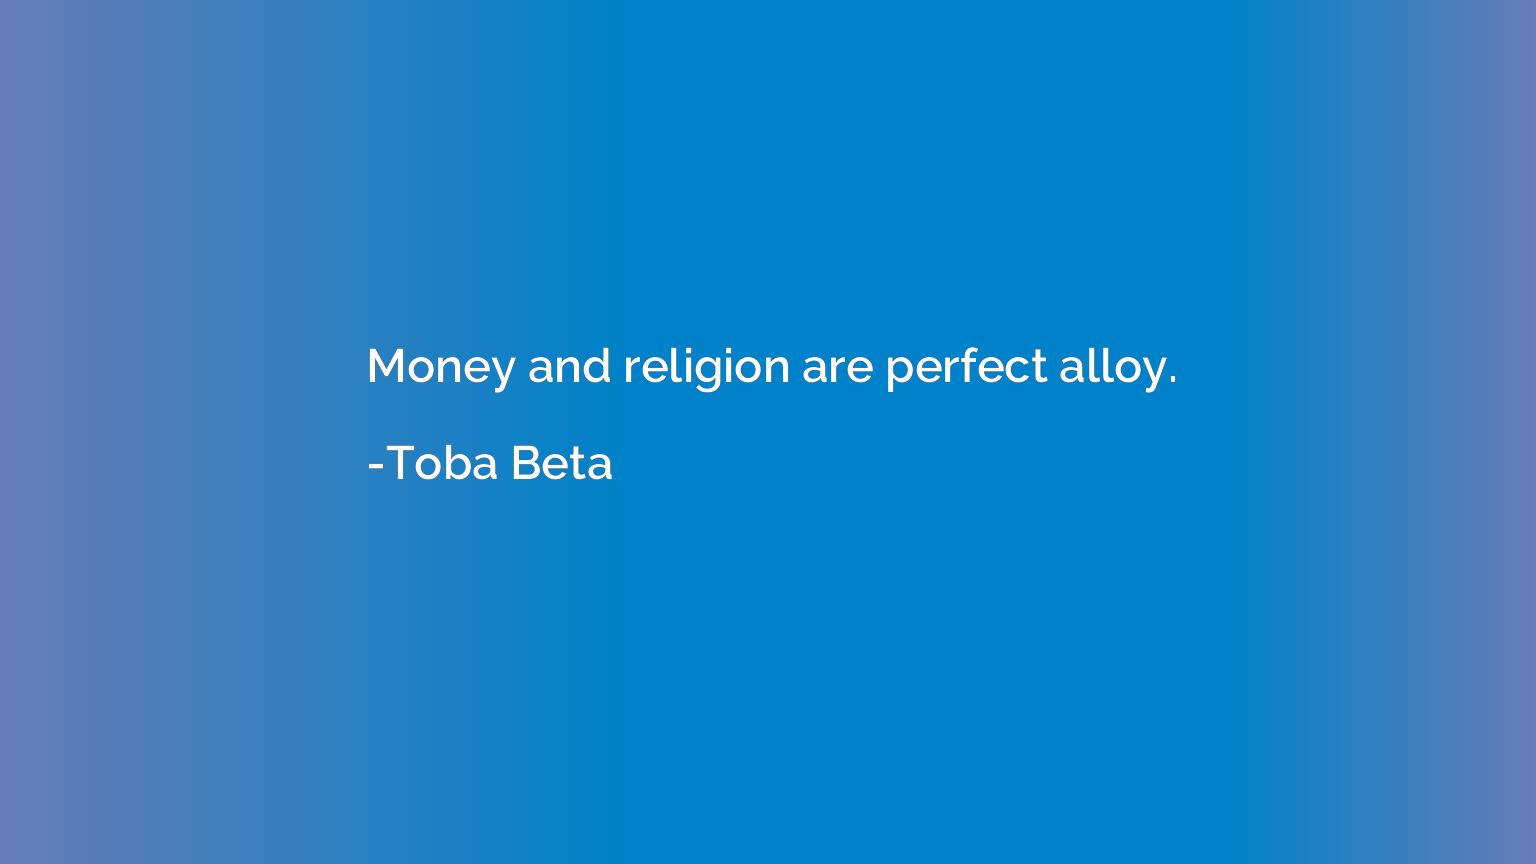 Money and religion are perfect alloy.